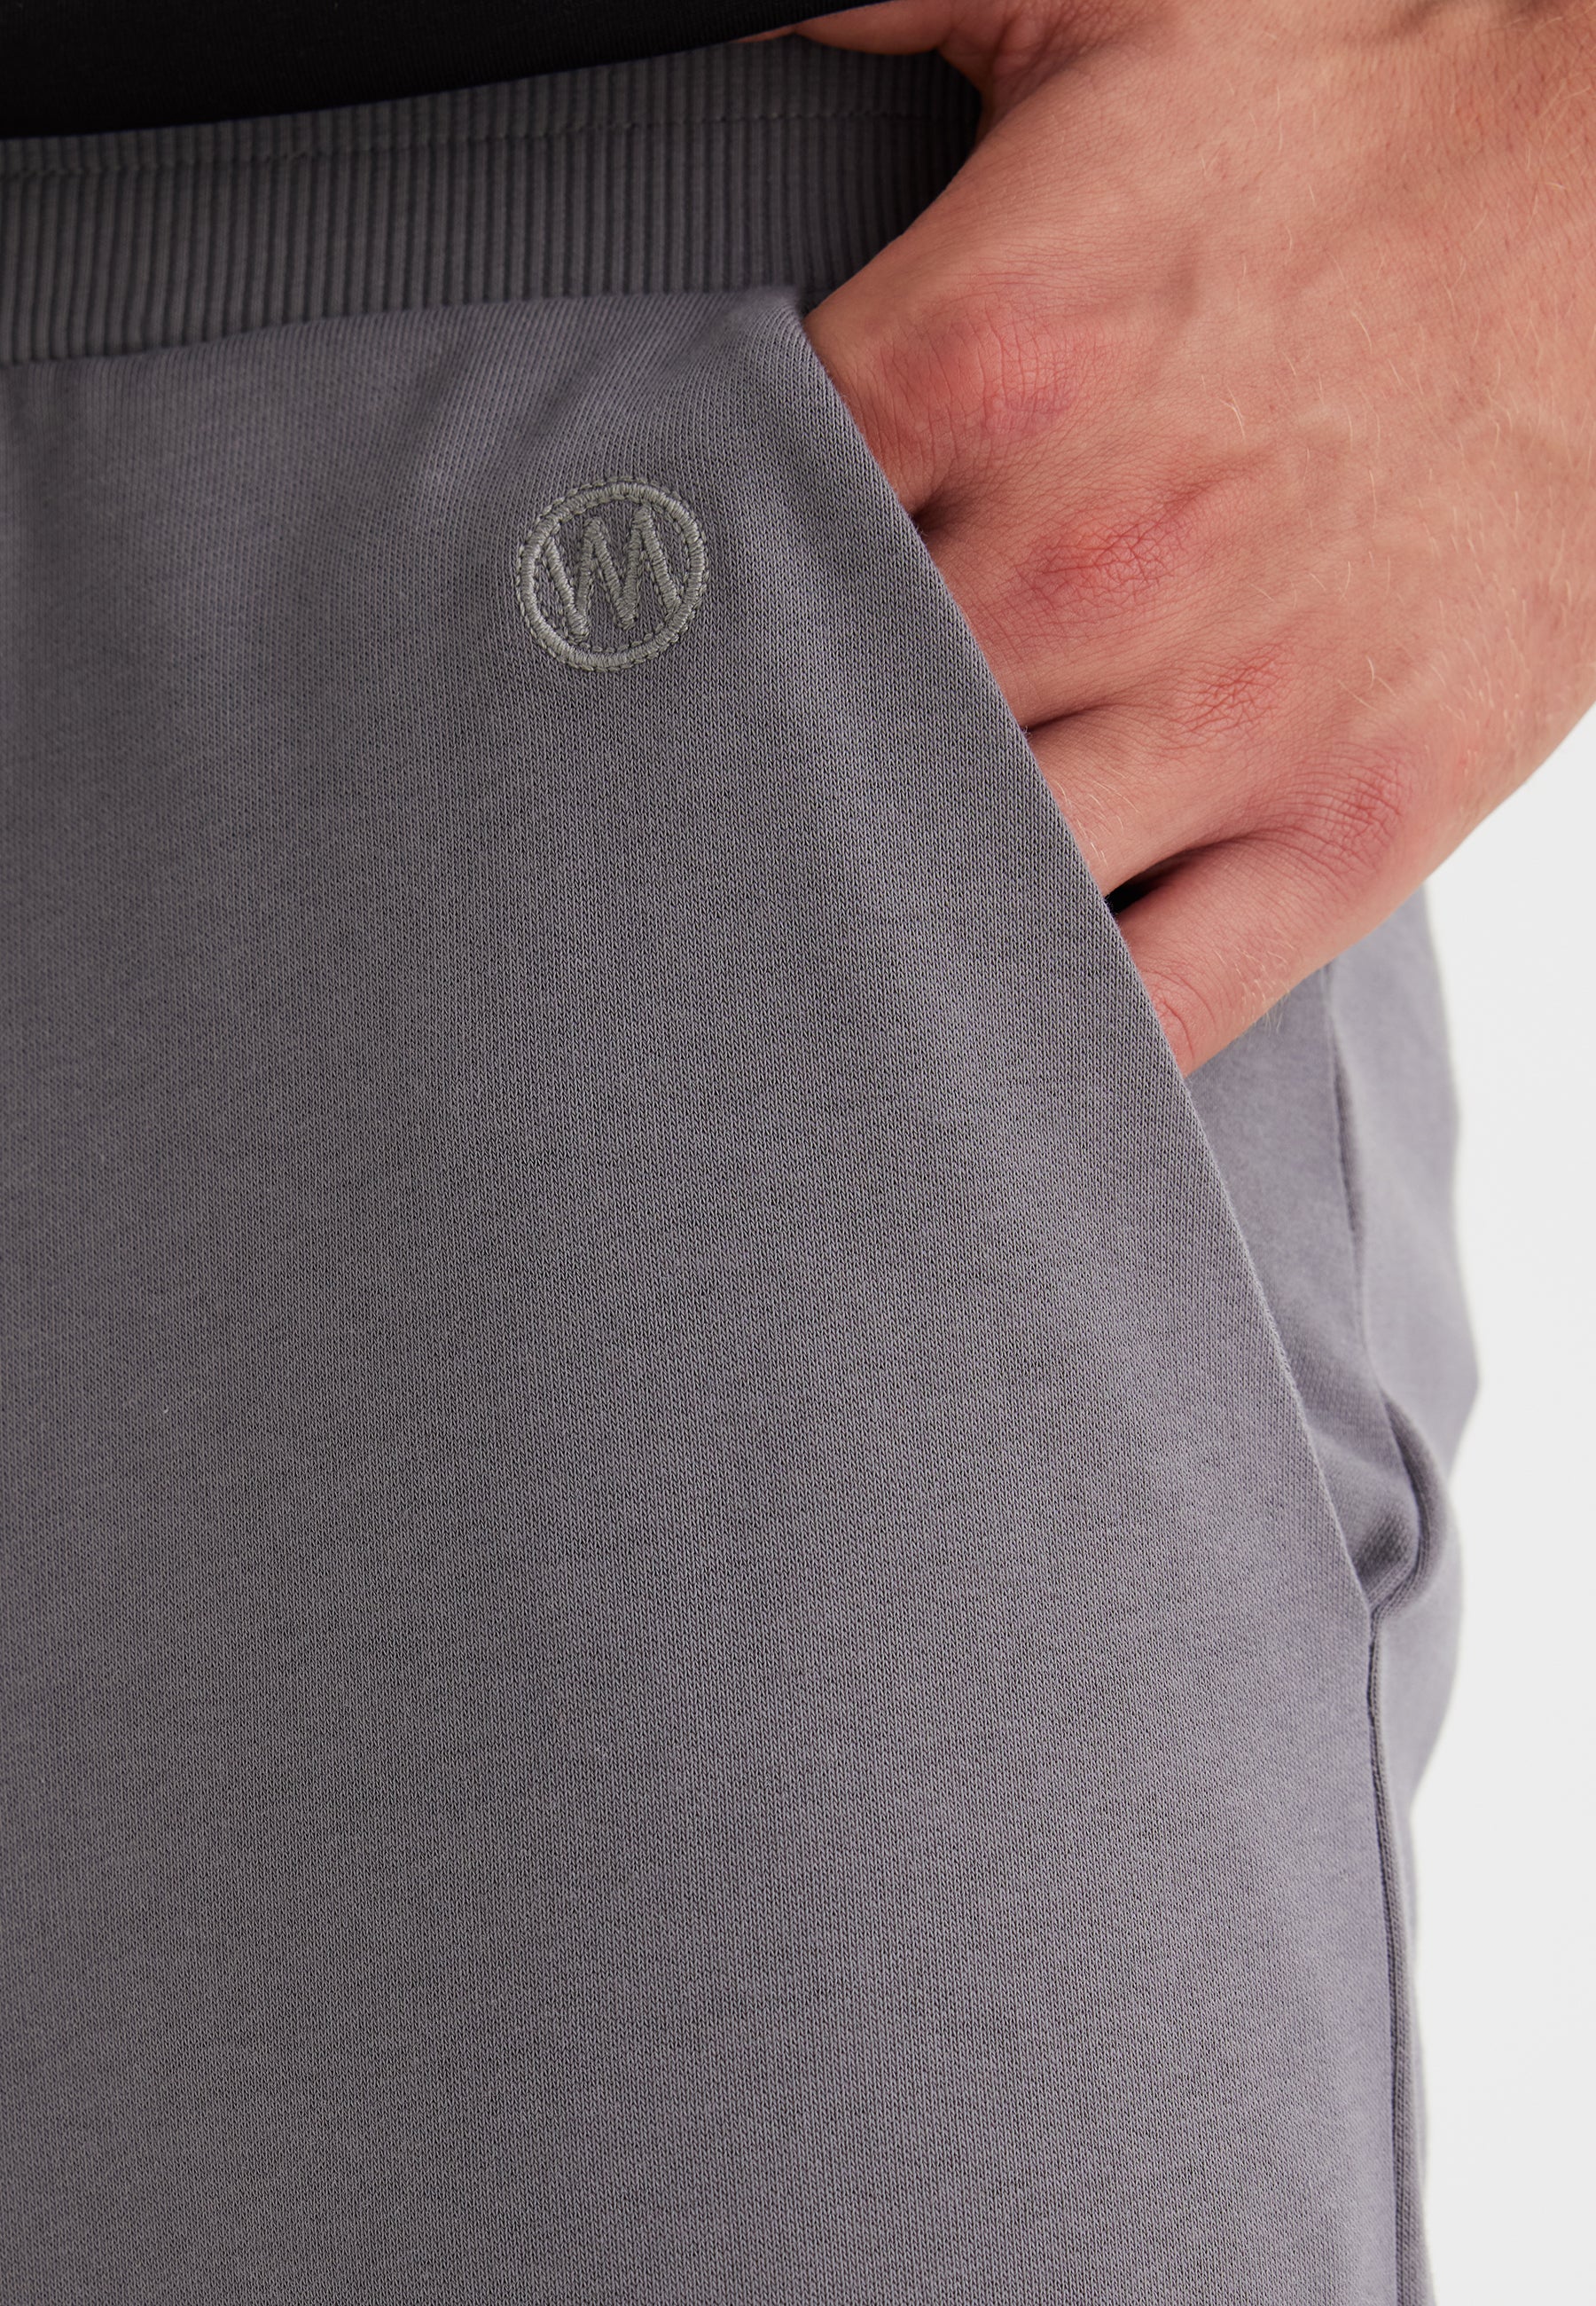 CORE JOGGER in Ultimate Grey